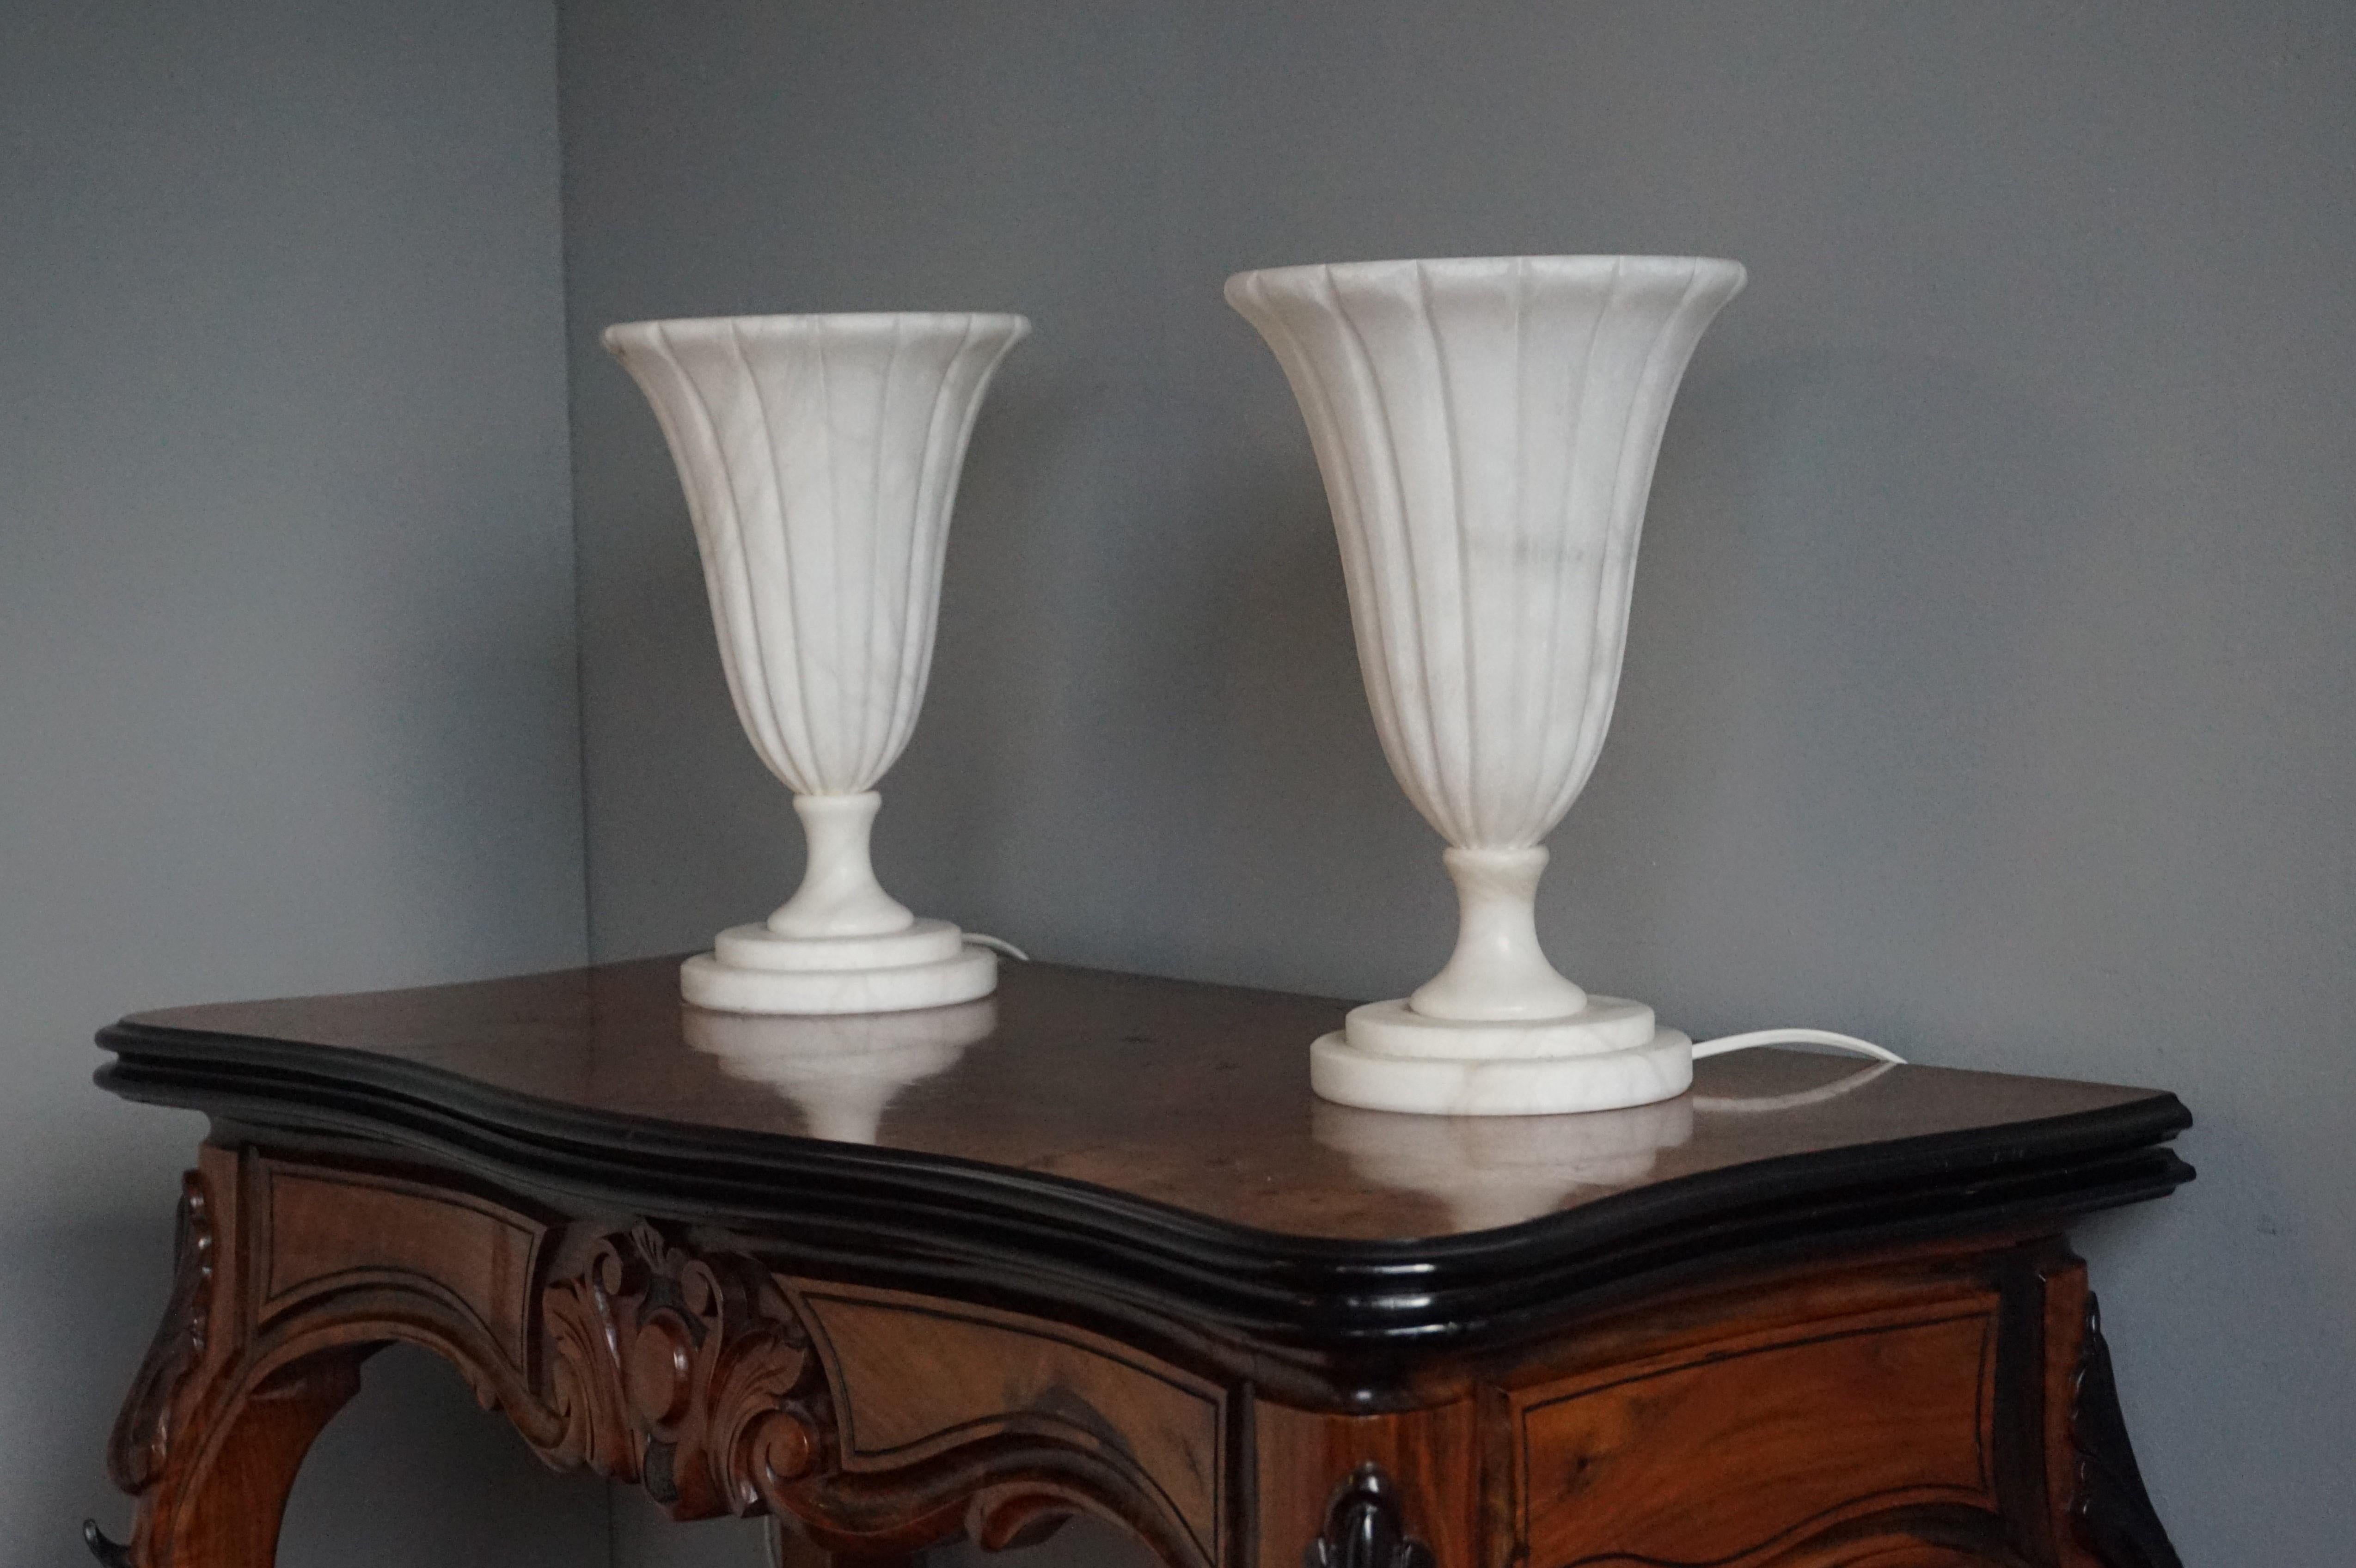 Rare Pair of Midcentury Made Alabaster Table or Desk Lamps / Classical Style For Sale 10